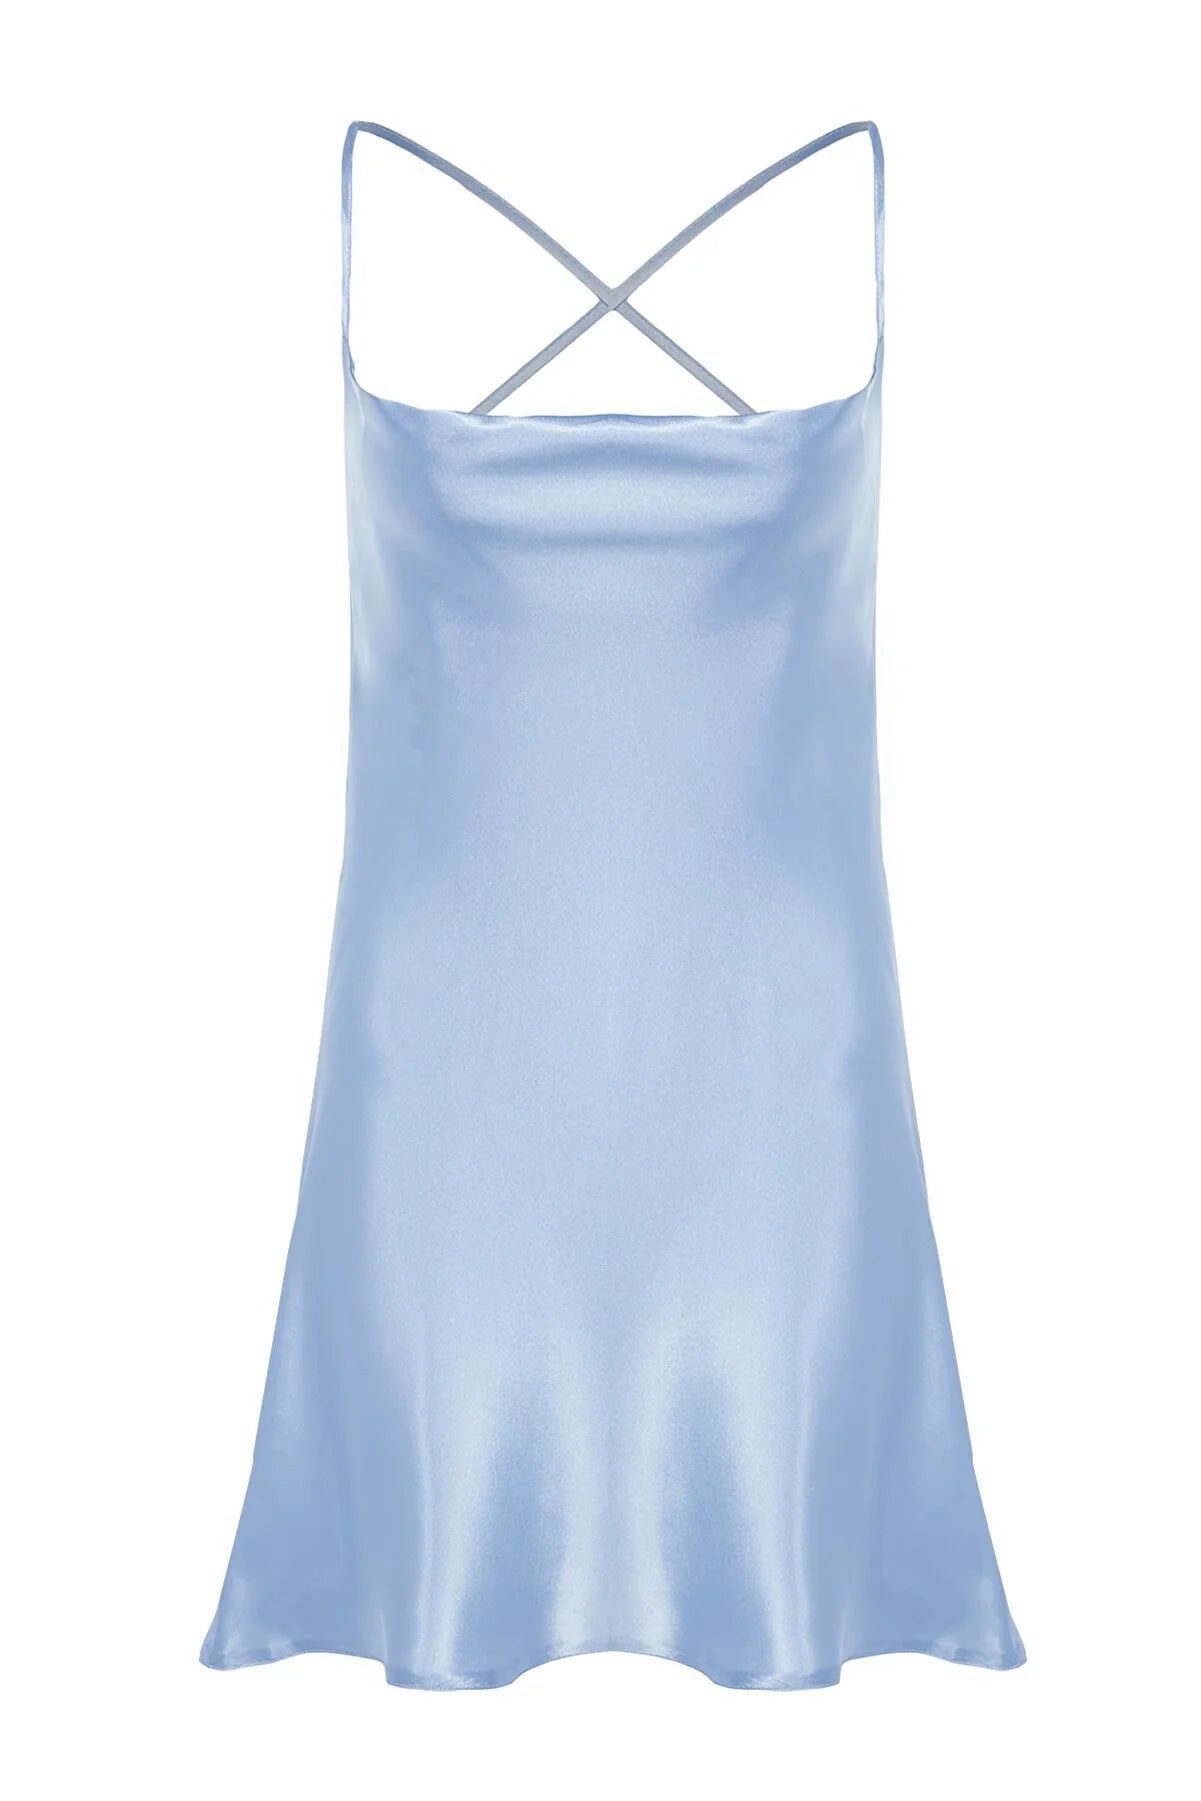 Blue Back Detailed Satin Woven Nightgown - Lebbse